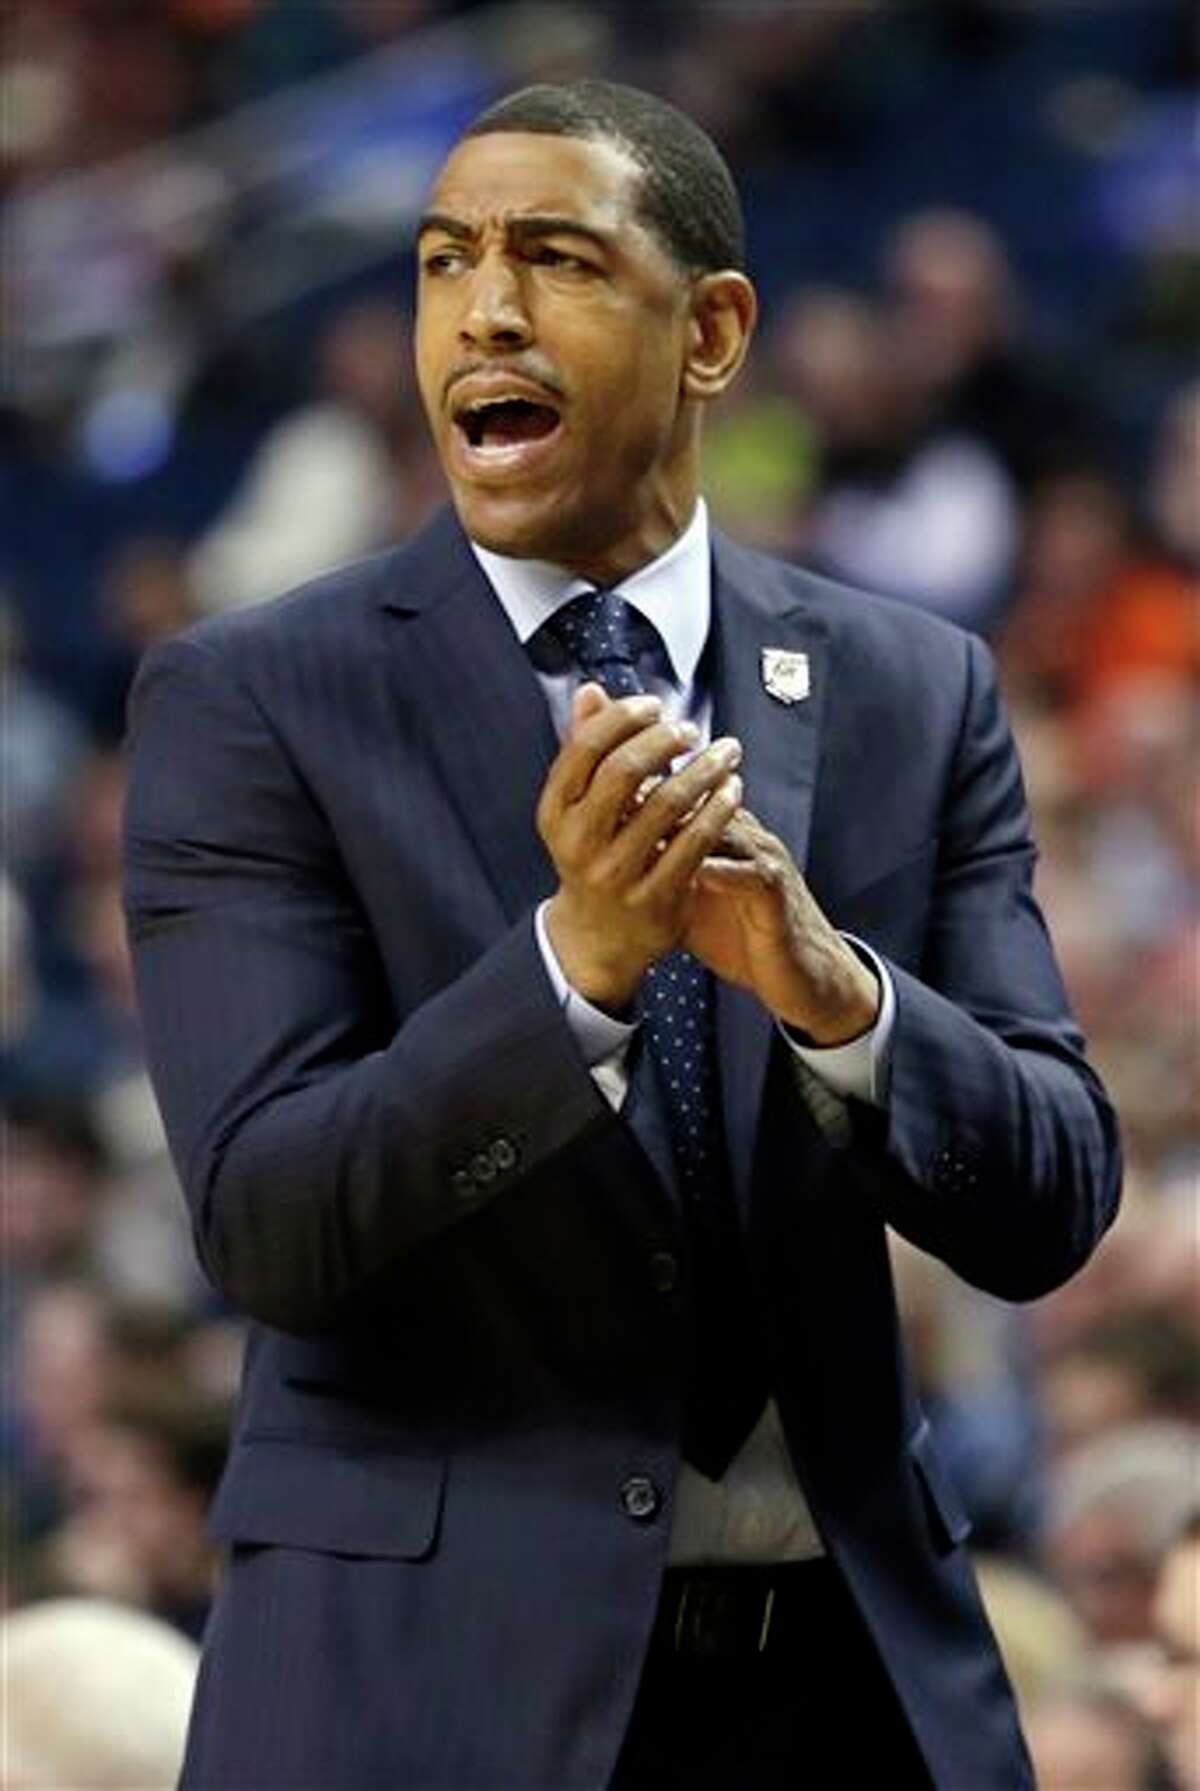 Connecticut head coach Kevin Ollie instructs his team during the first half of a second-round game against Saint Joseph's in the NCAA college basketball tournament in Buffalo, N.Y., Thursday, March 20, 2014. (AP Photo/Nick LoVerde)